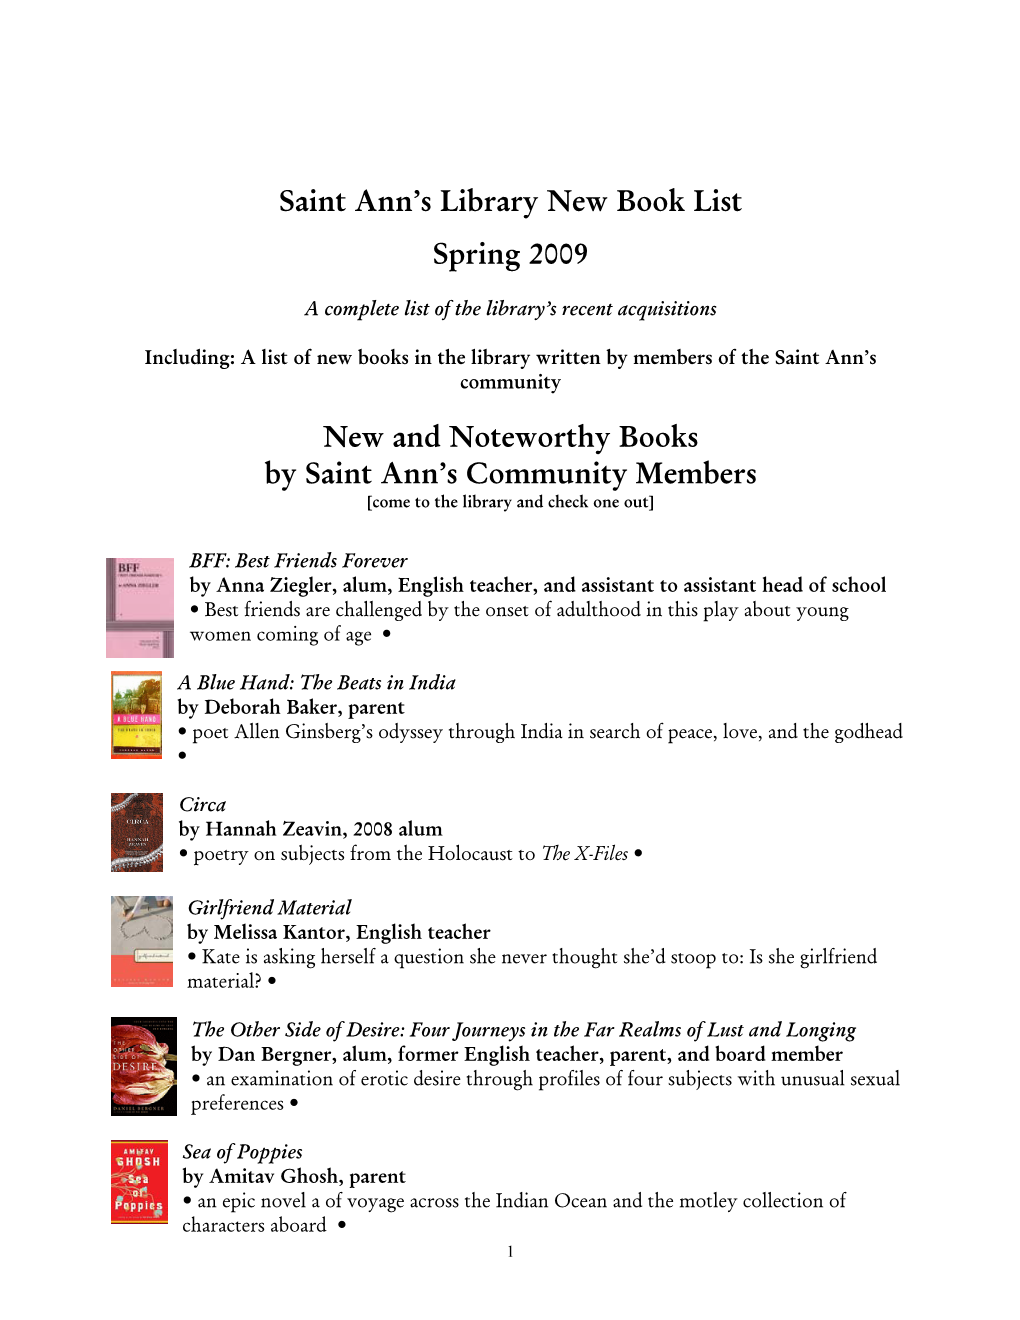 Saint Ann's Library New Book List Spring 2009 New and Noteworthy